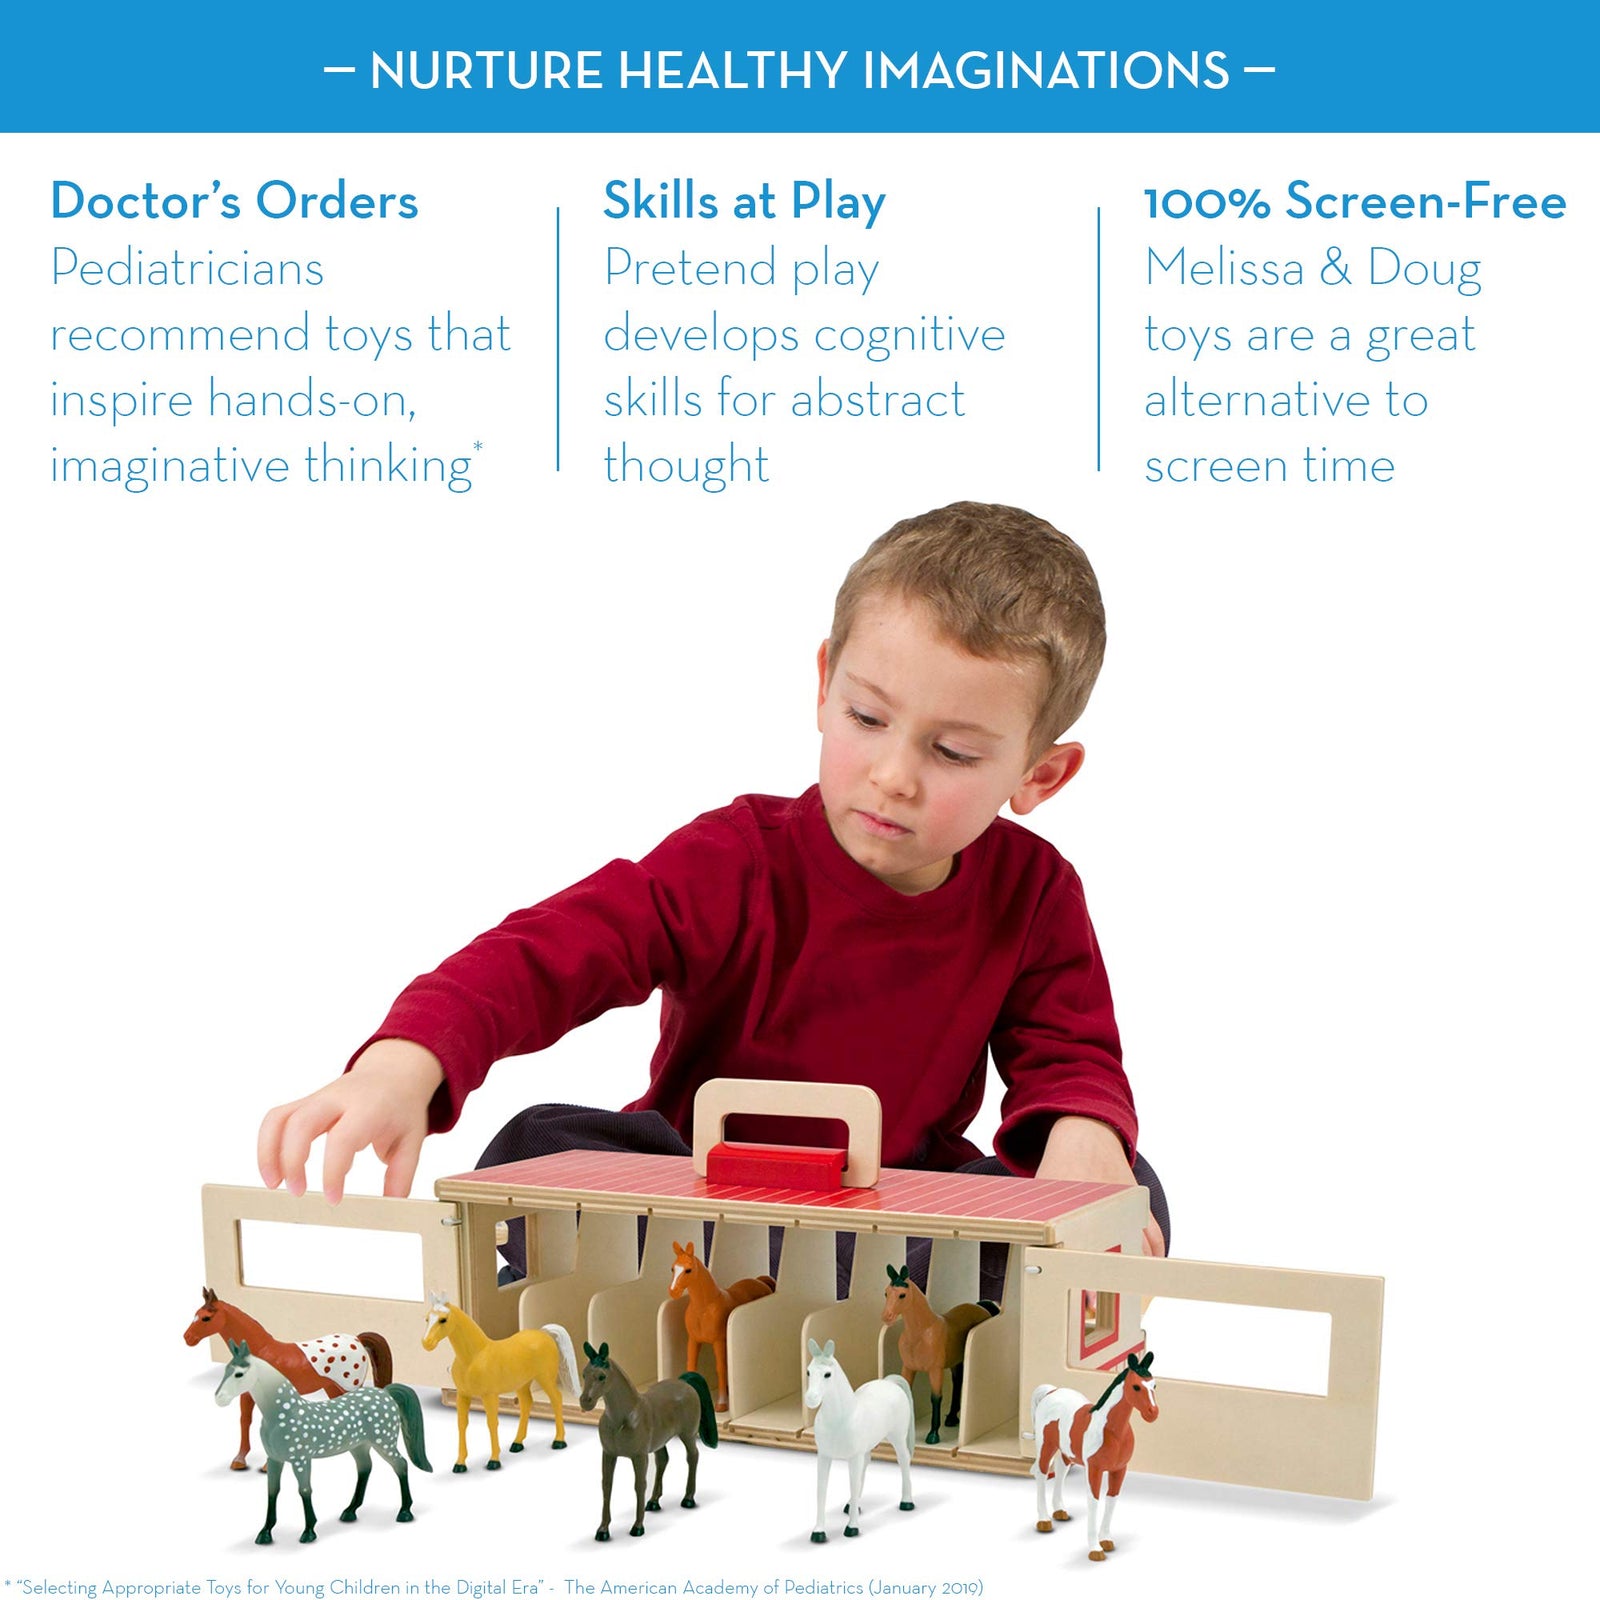 Melissa & Doug Take-Along Show-Horse Stable Play Set With Wooden Stable Box and 8 Toy Horses